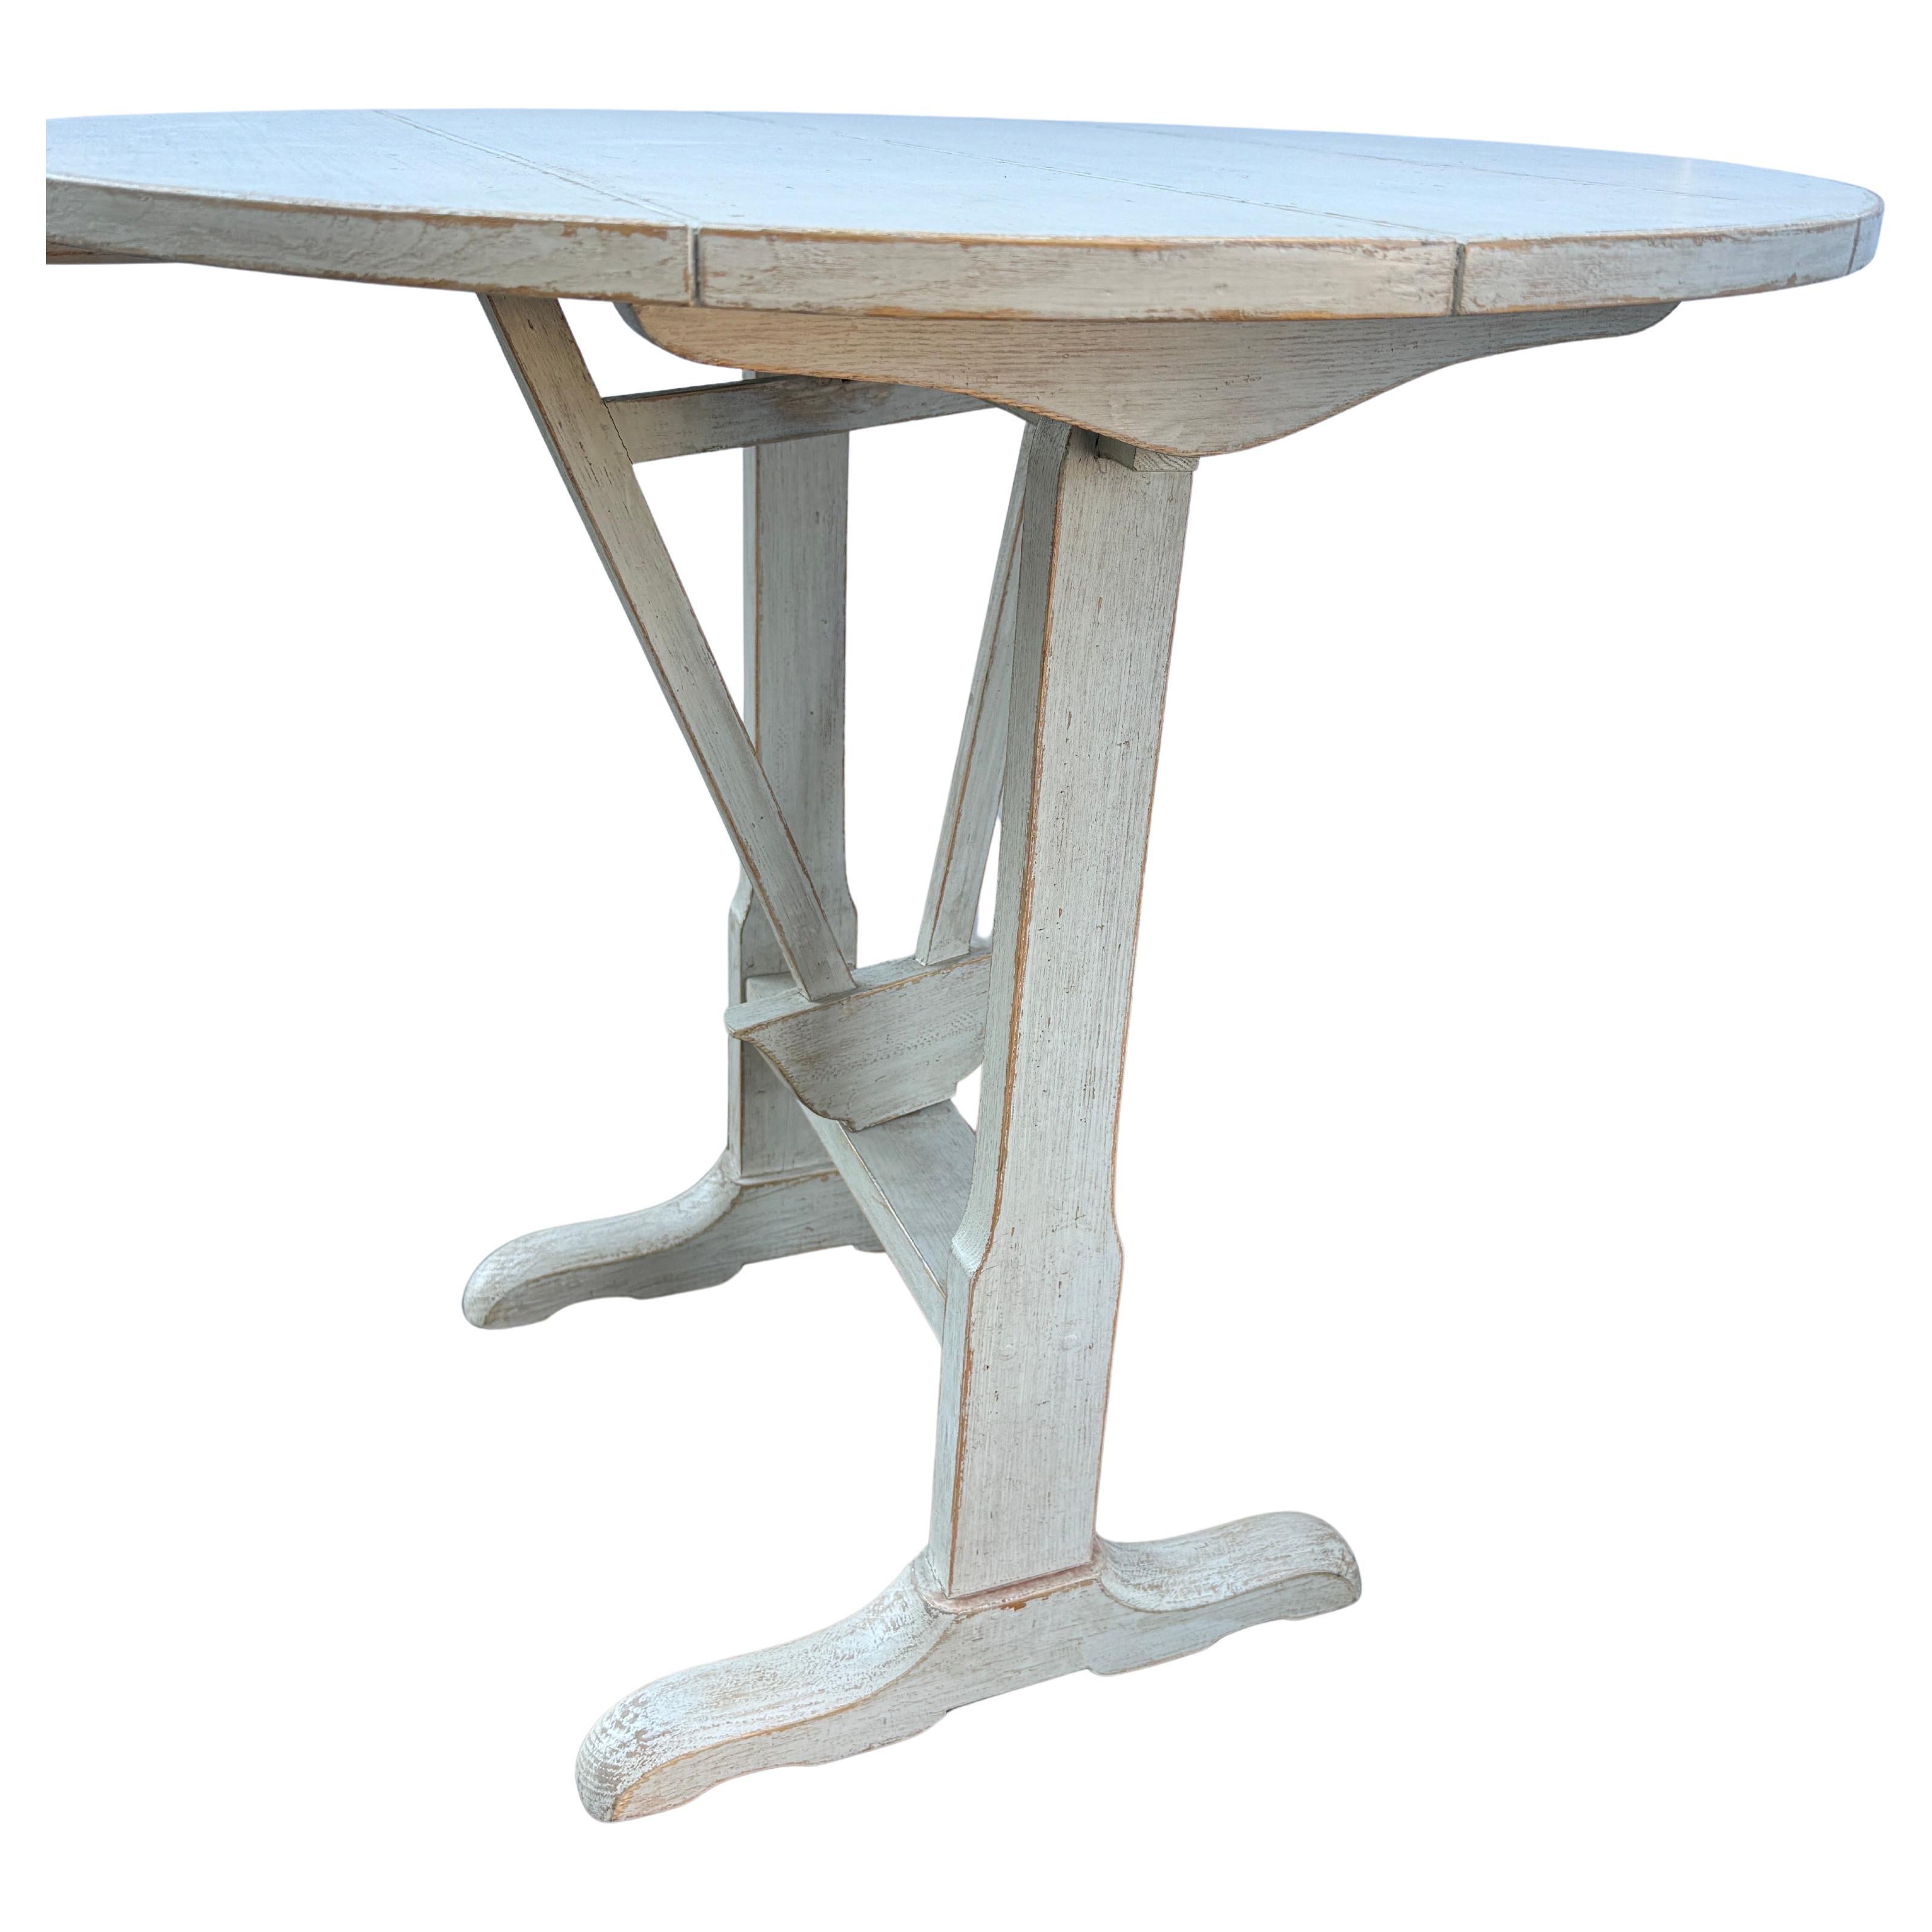 Tilt-Top Round Wine Tasting Table, France

Vintage French wine tasting low table, with a Gustavian painted patina with folding top, secured by a swinging gate. The trestle base is supported by arched sledged feet. Wonderful addition to any formal or